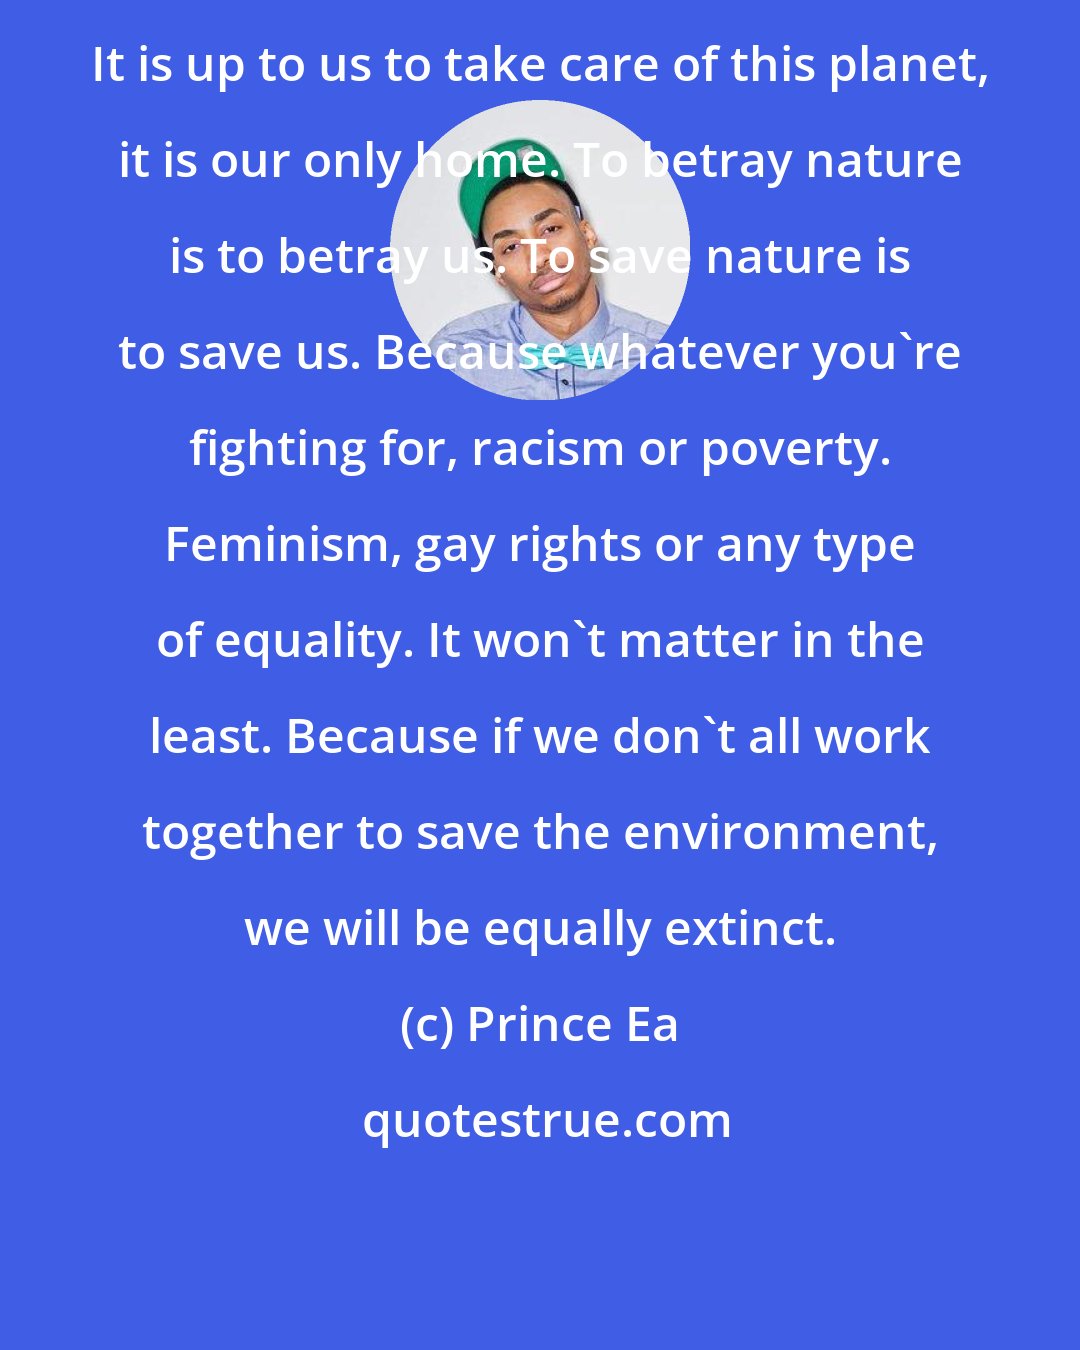 Prince Ea: It is up to us to take care of this planet, it is our only home. To betray nature is to betray us. To save nature is to save us. Because whatever you're fighting for, racism or poverty. Feminism, gay rights or any type of equality. It won't matter in the least. Because if we don't all work together to save the environment, we will be equally extinct.